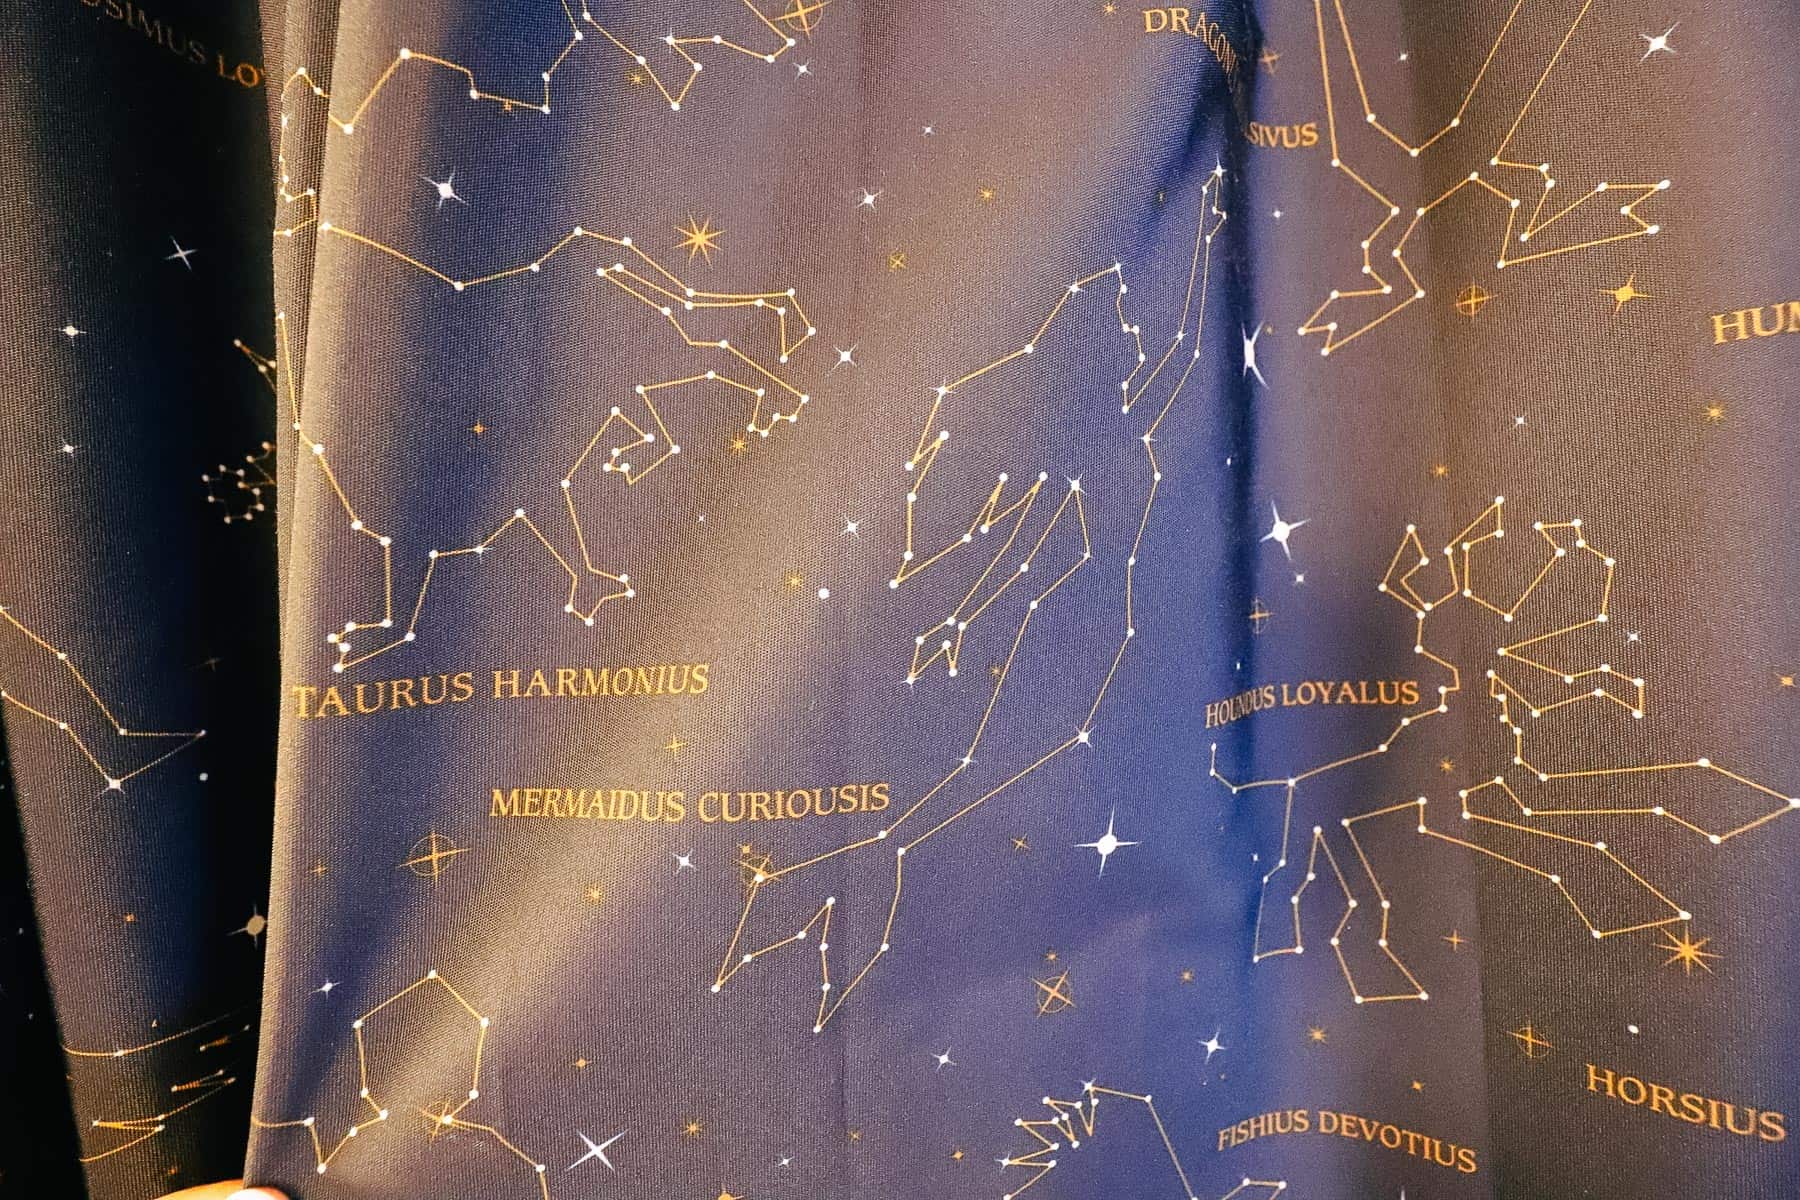 curtains that are dark navy blue with golden constellations and Disney characters